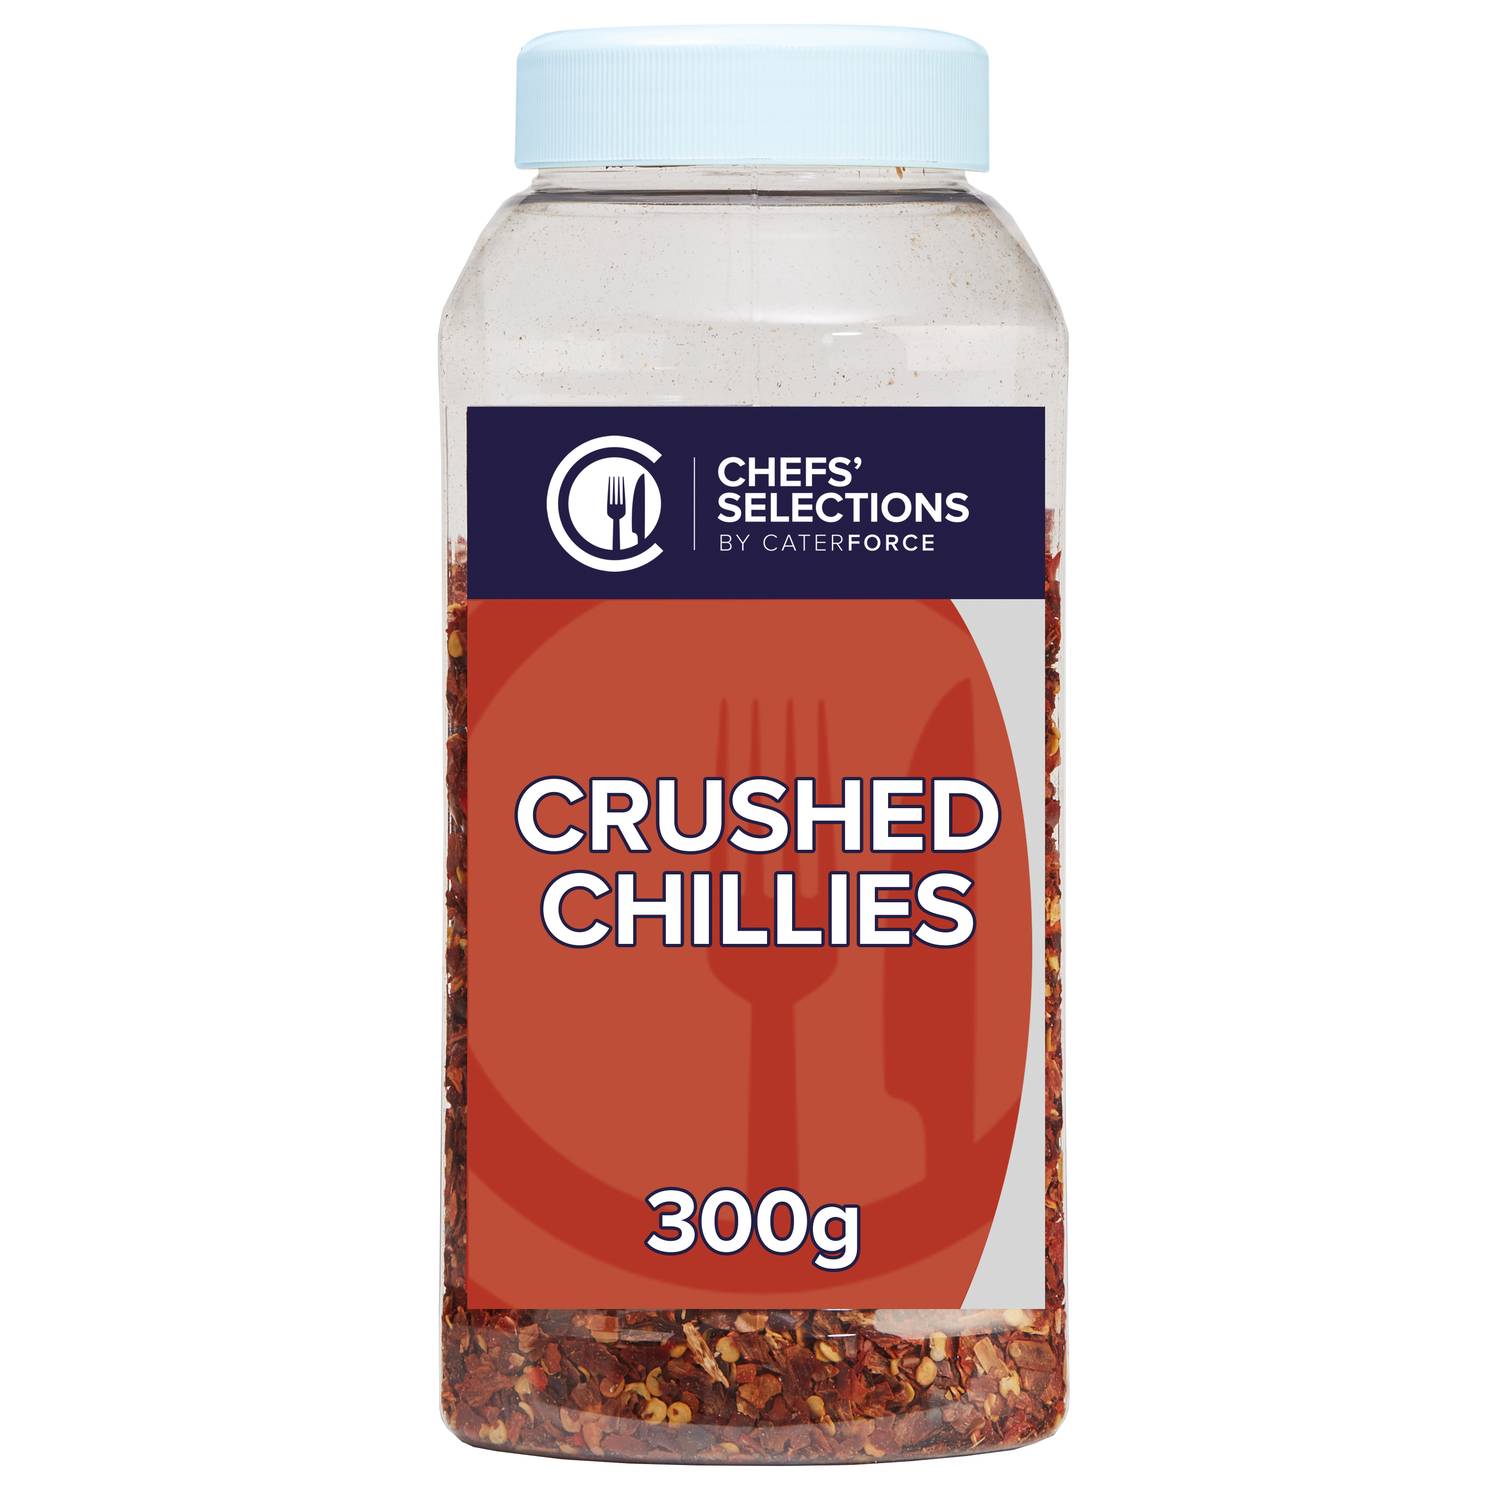 Chefs’ Selections Crushed Chillies (6 x 300g)